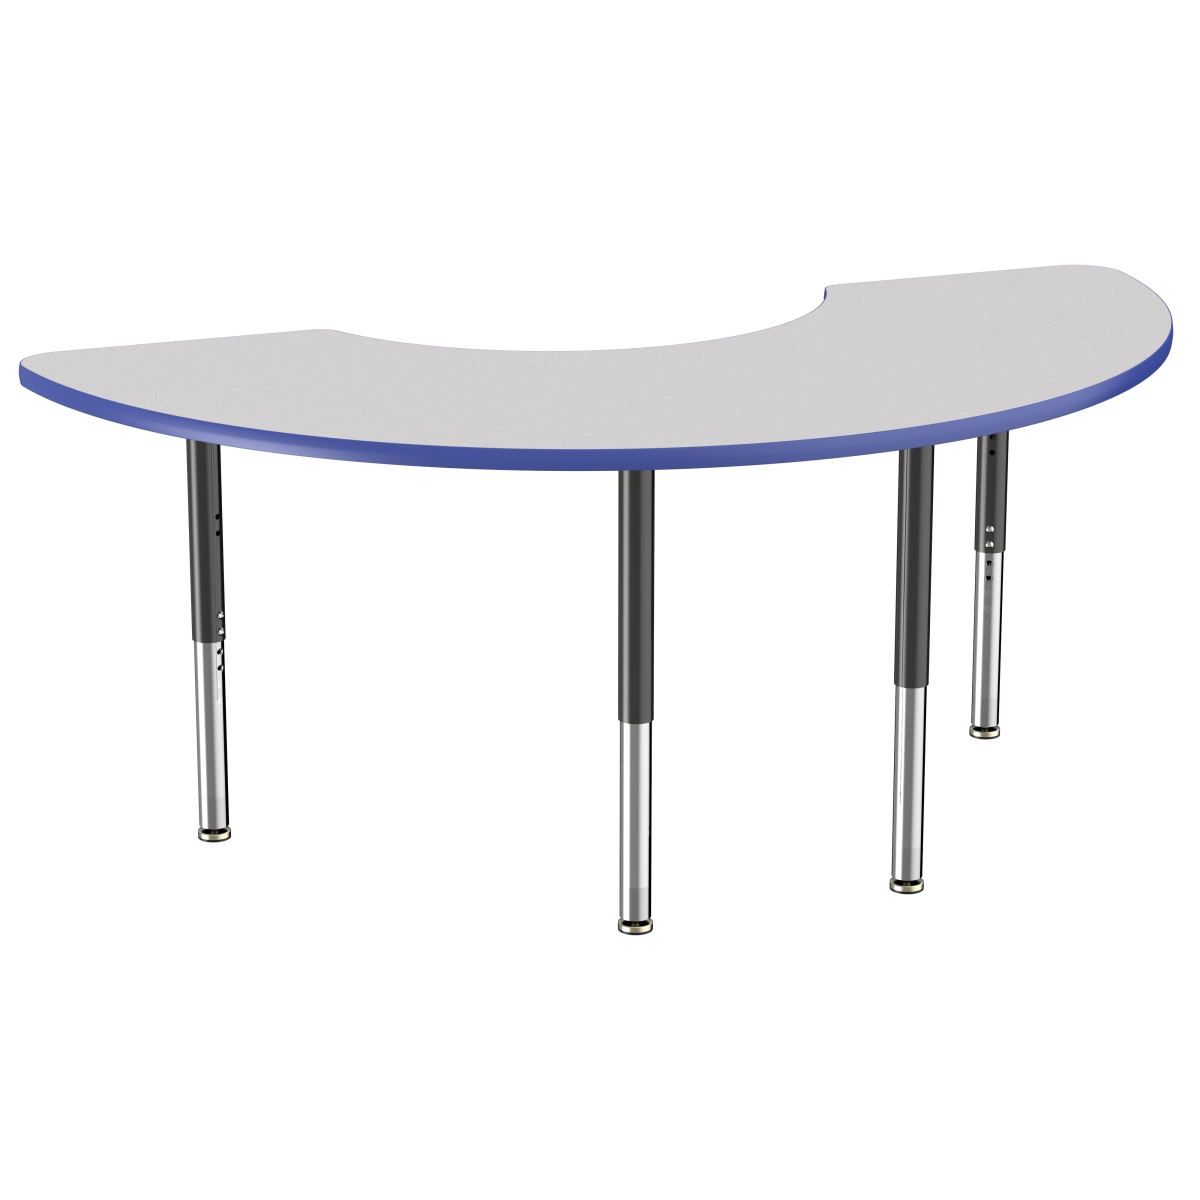 10080-gybl 36 X 72 In. Half Moon T-mold Adjustable Activity Table With Super Leg - Grey & Blue